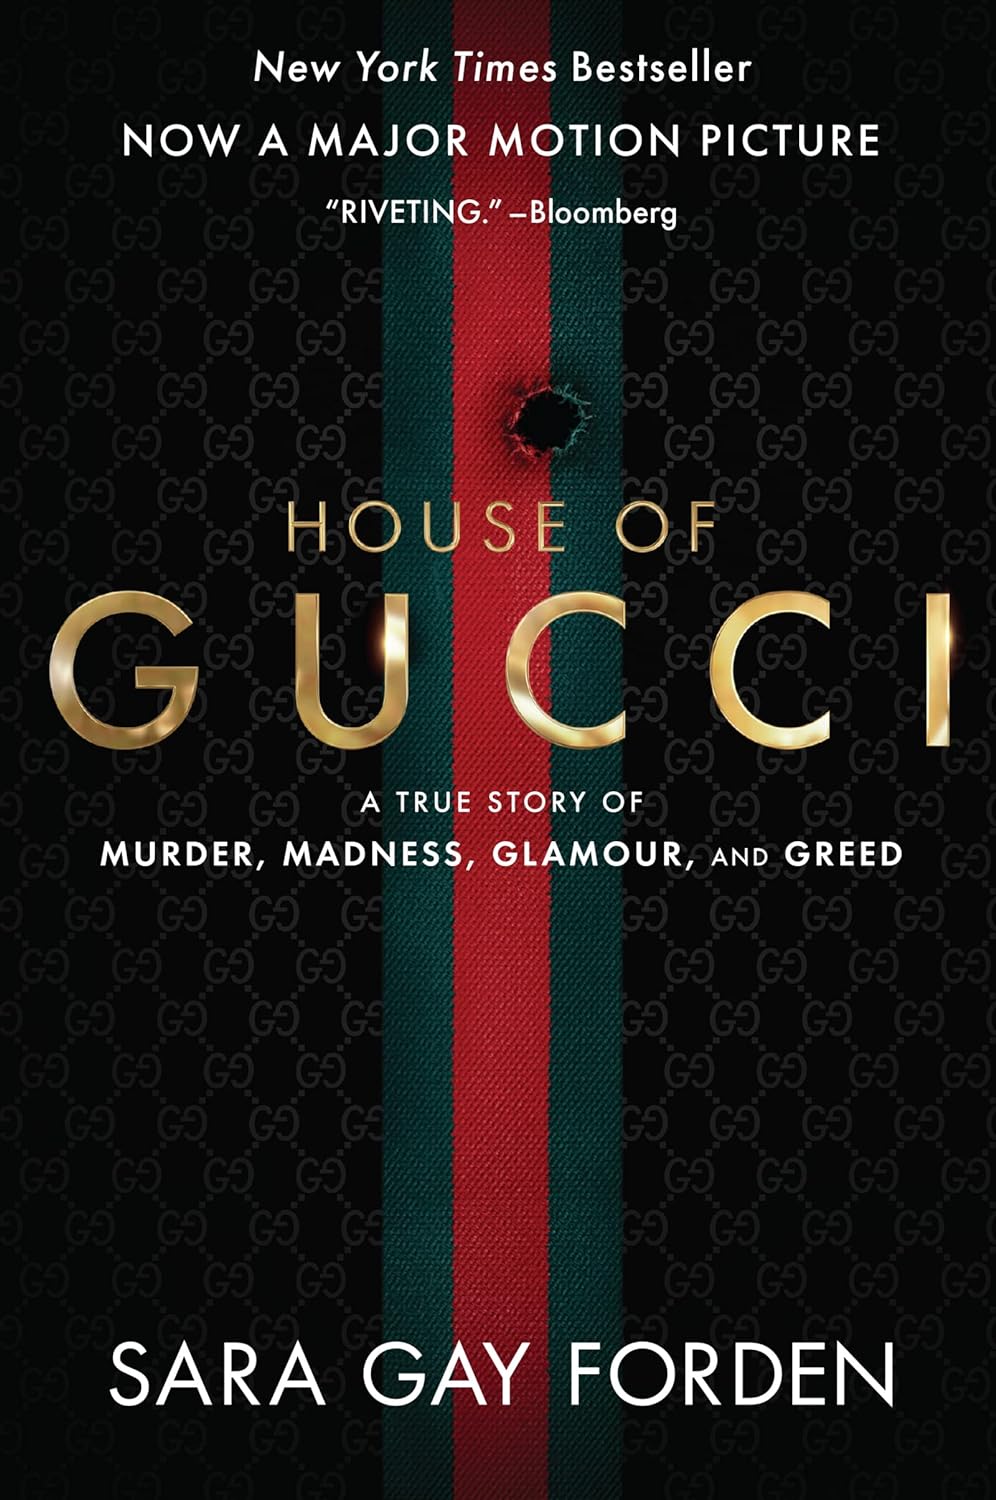 Sách Ngoại Văn - The House of Gucci [Movie Tie-in]: A True Story of Murder, Madness, Glamour, and Greed by Sara Gay Forden (Author)